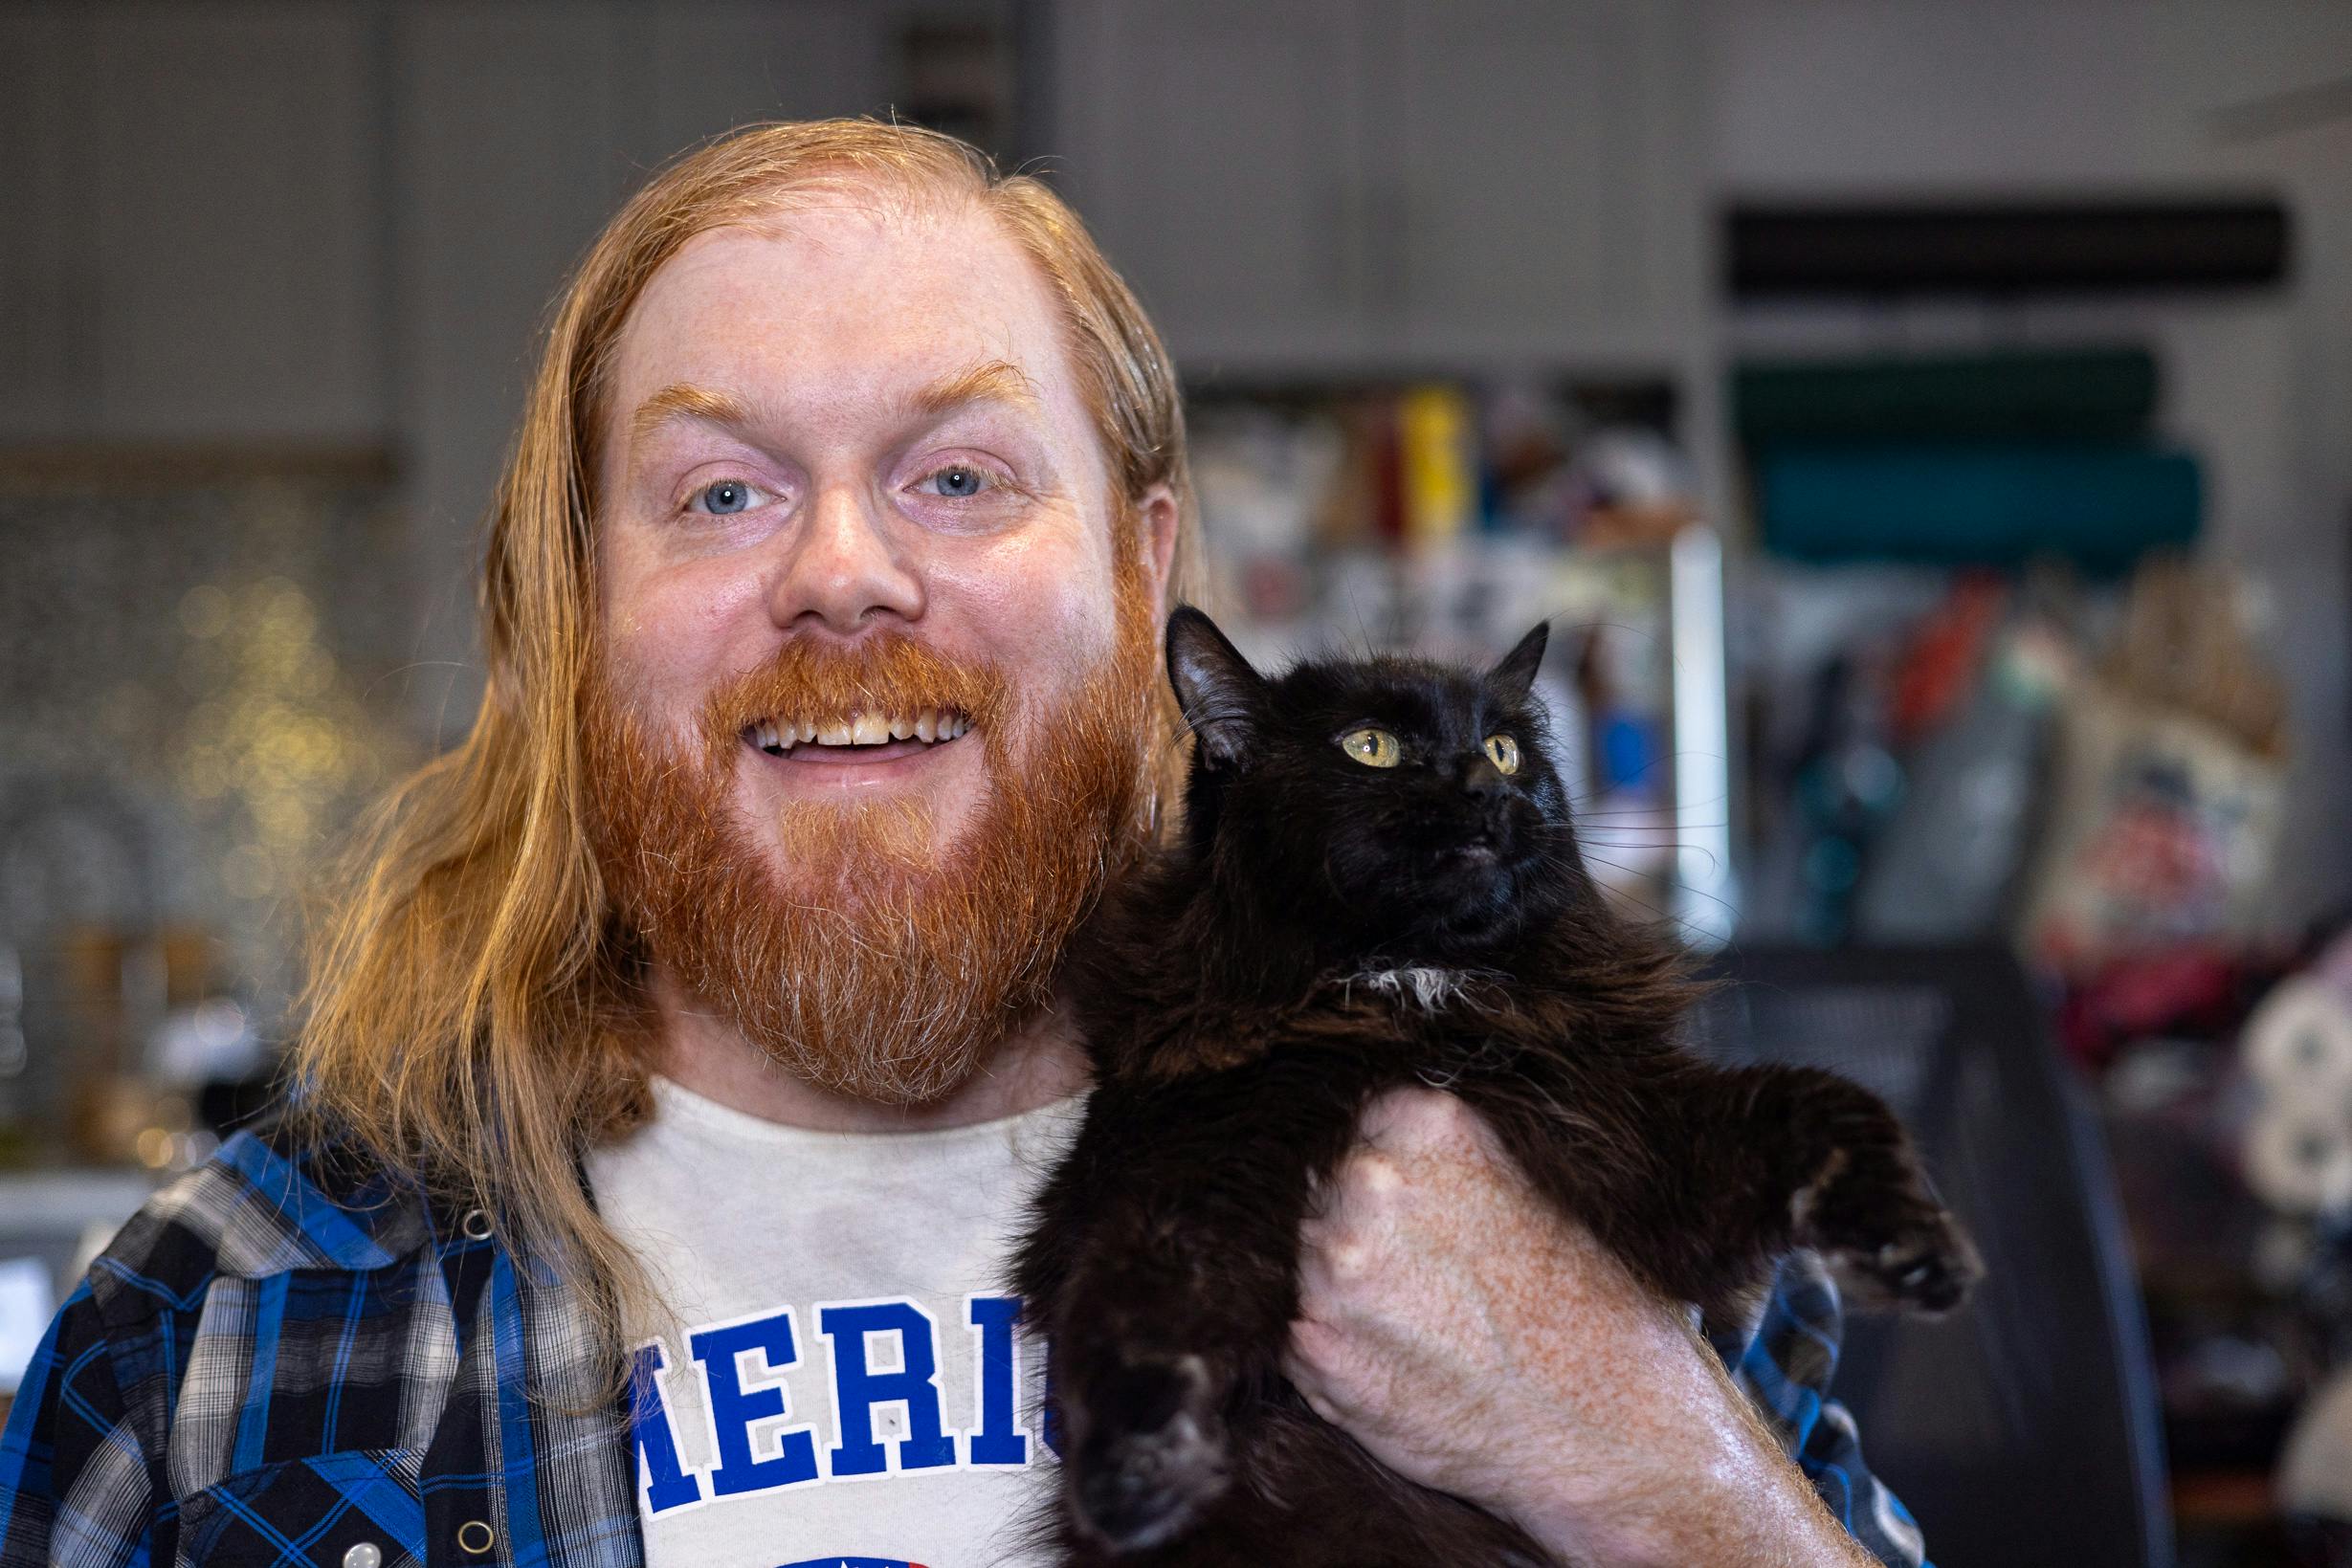 self portrait of a bearded red headed man with long hair and a blue shirt holding a cat